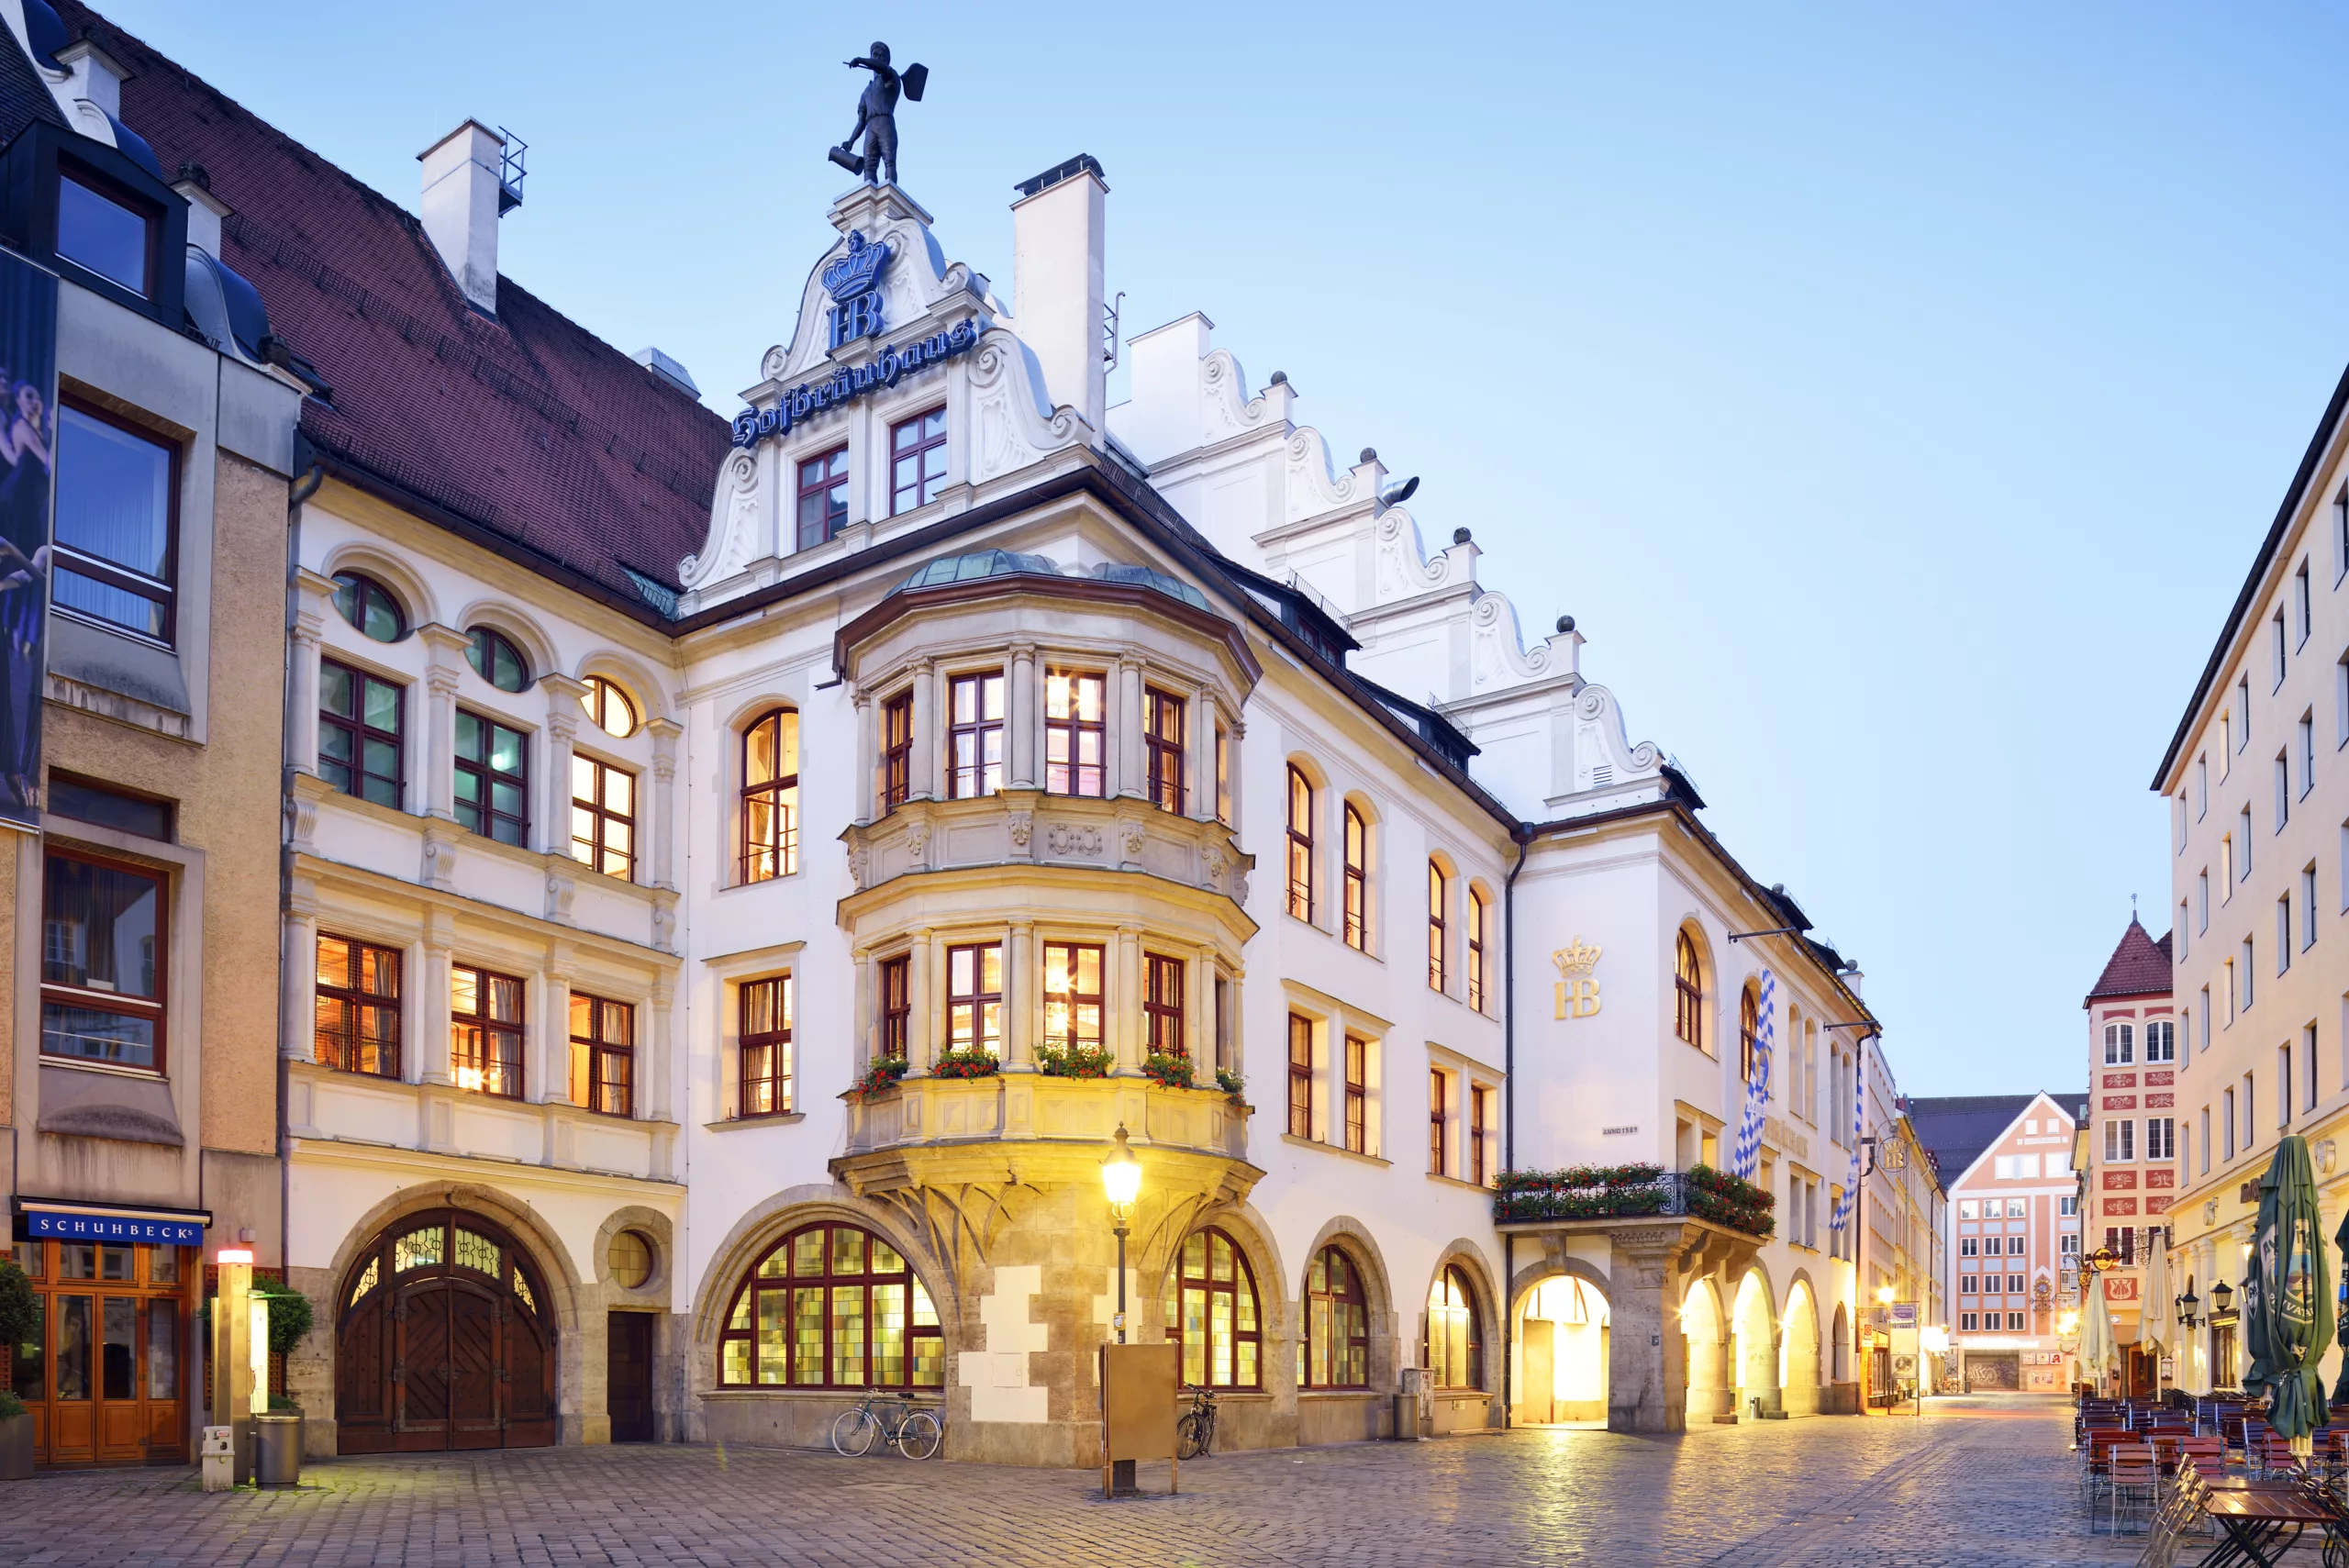 The Hofbräuhaus in Munich's Old Town